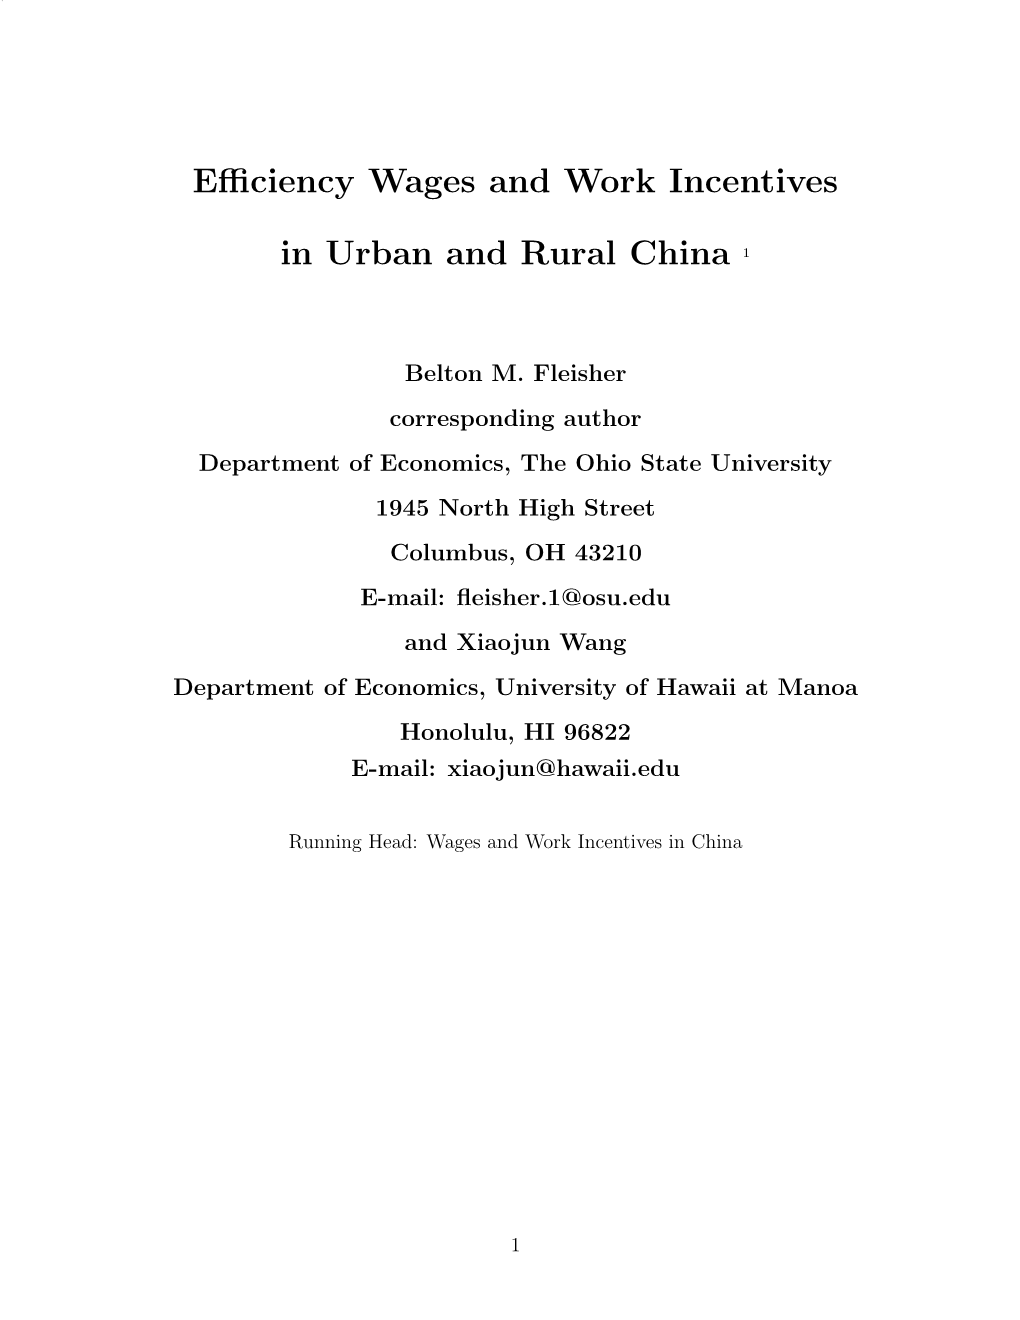 Efficiency Wages and Work Incentives in Urban and Rural China 1